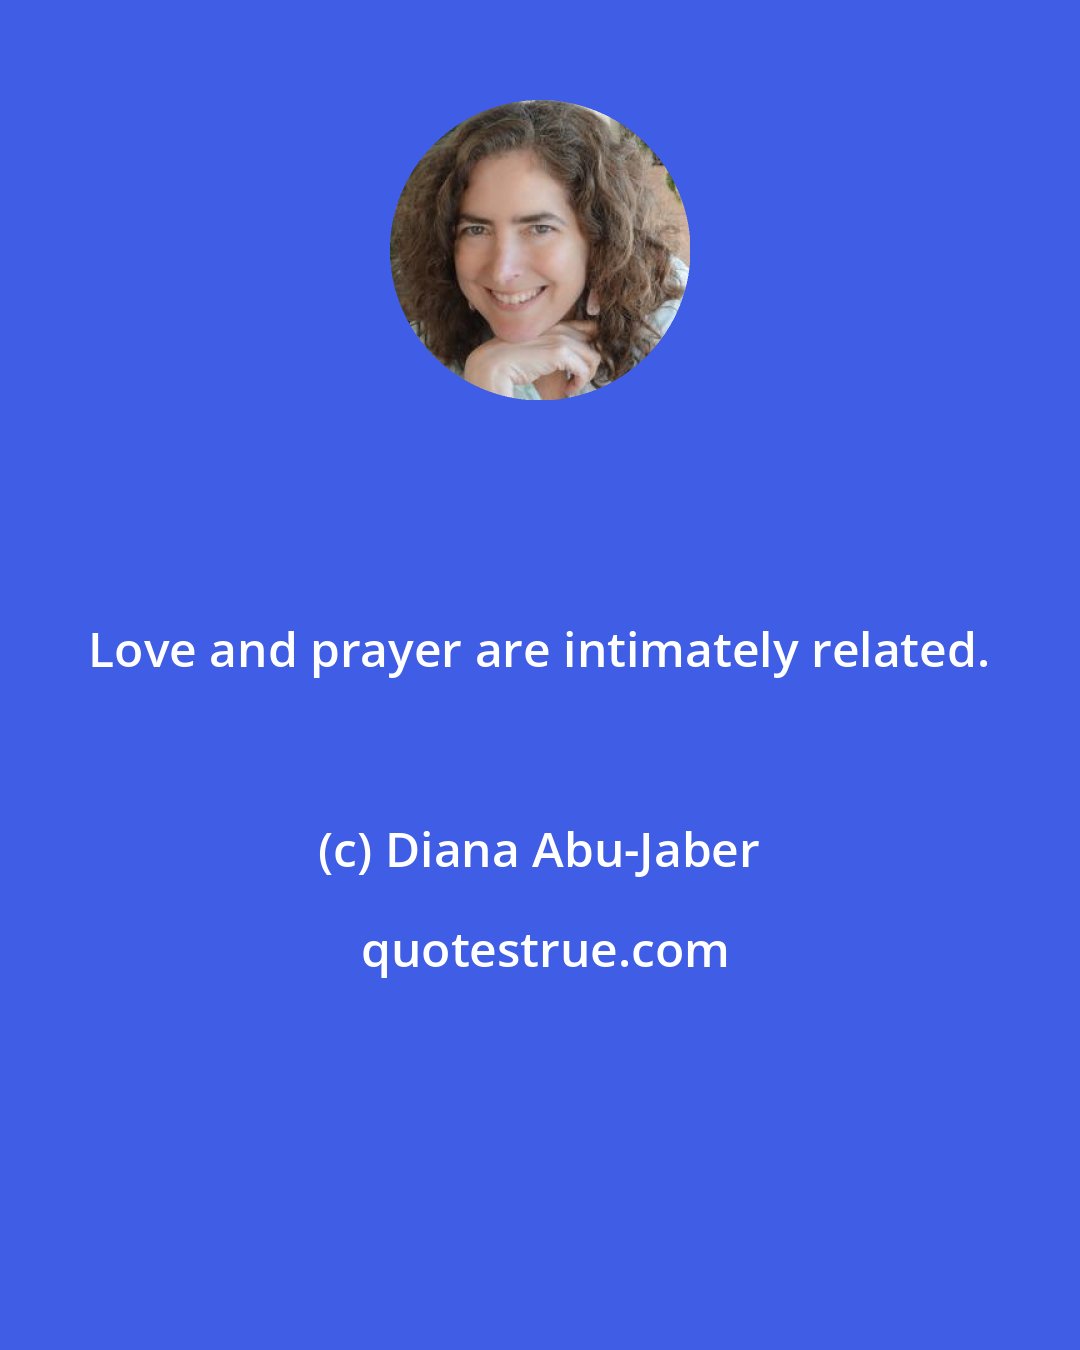 Diana Abu-Jaber: Love and prayer are intimately related.